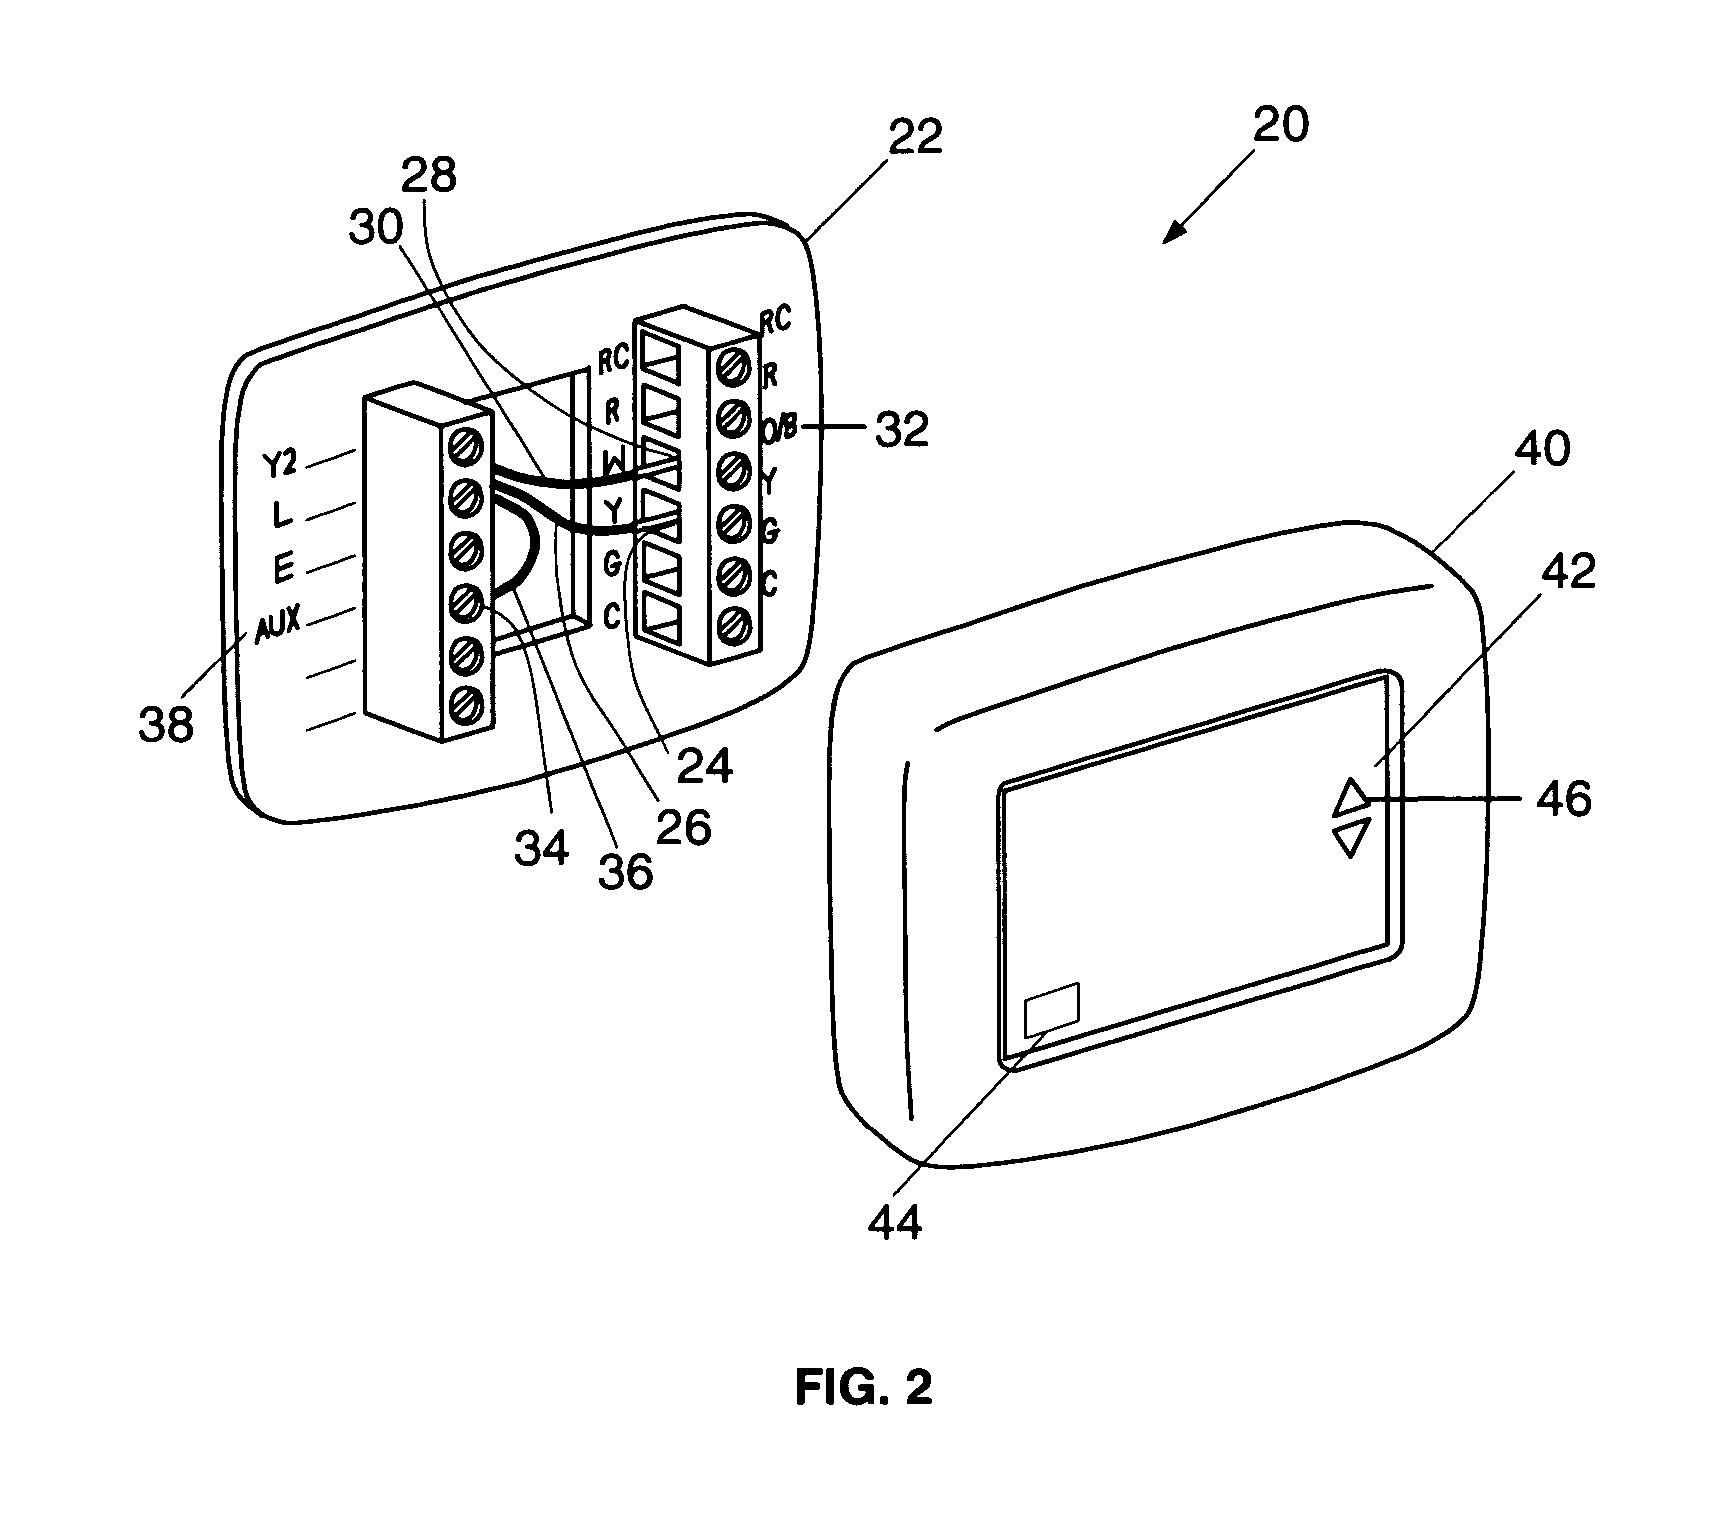 Thermostat for a heat pump or conventional heating system